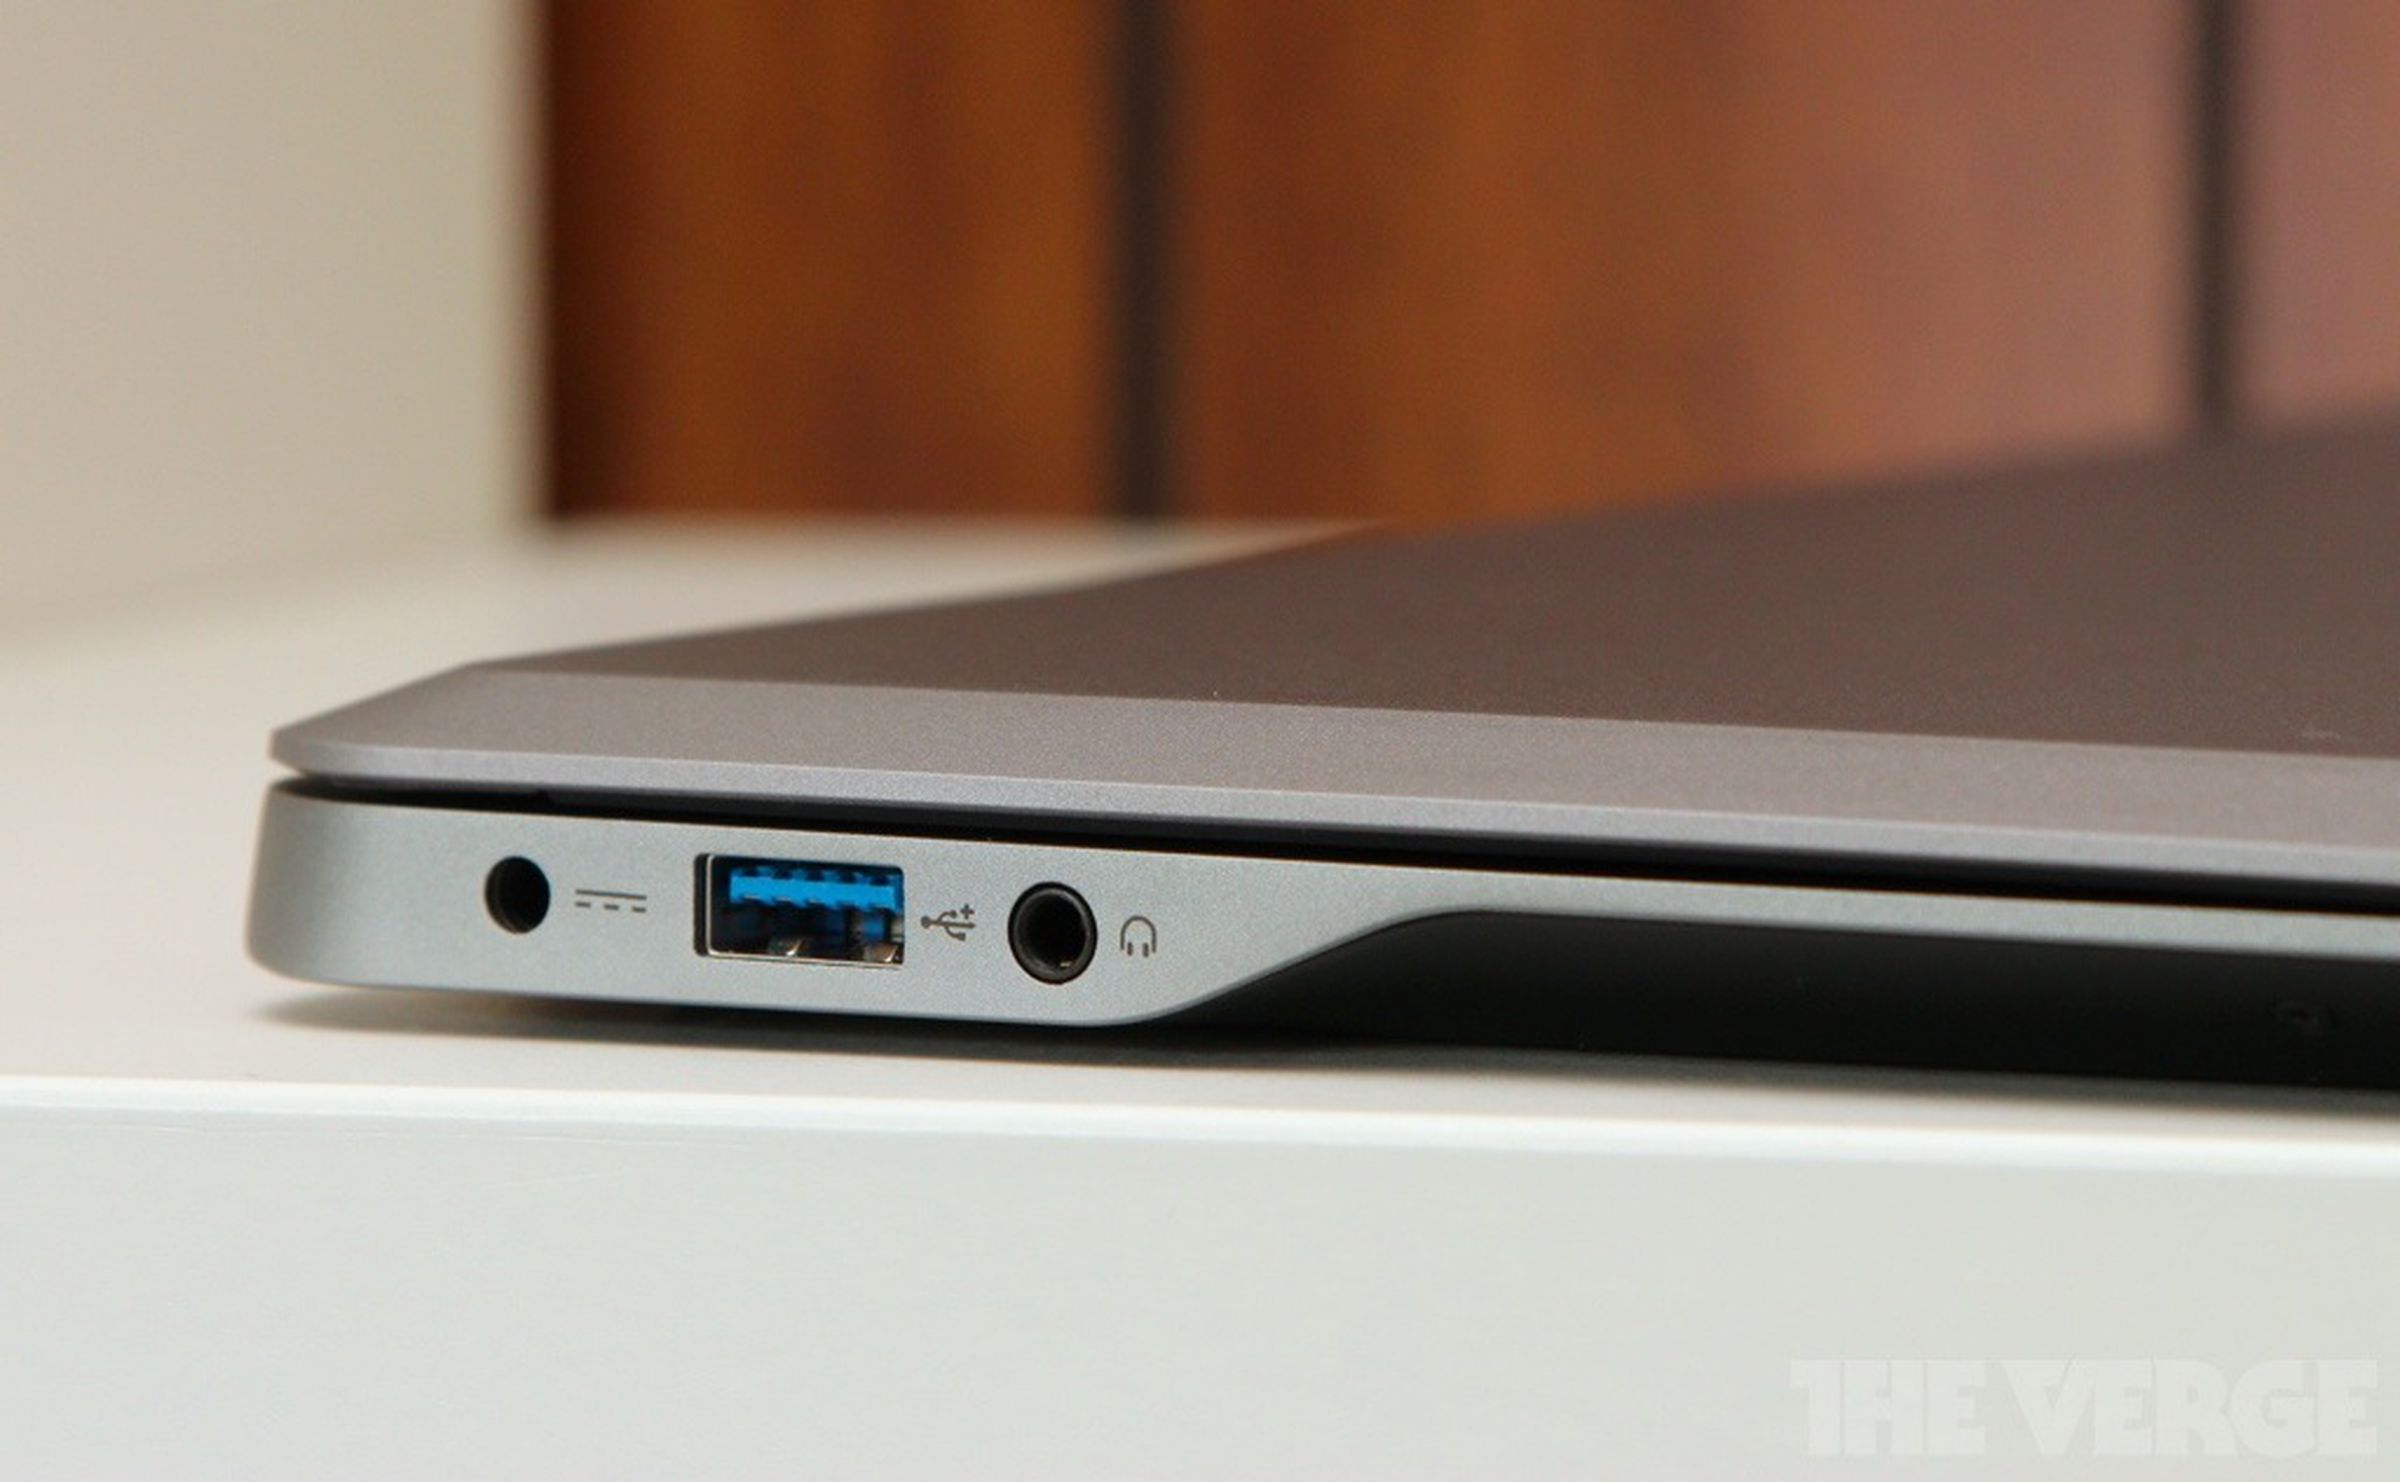 Vizio 15.6-inch Thin + Light Ultrabook review pictures